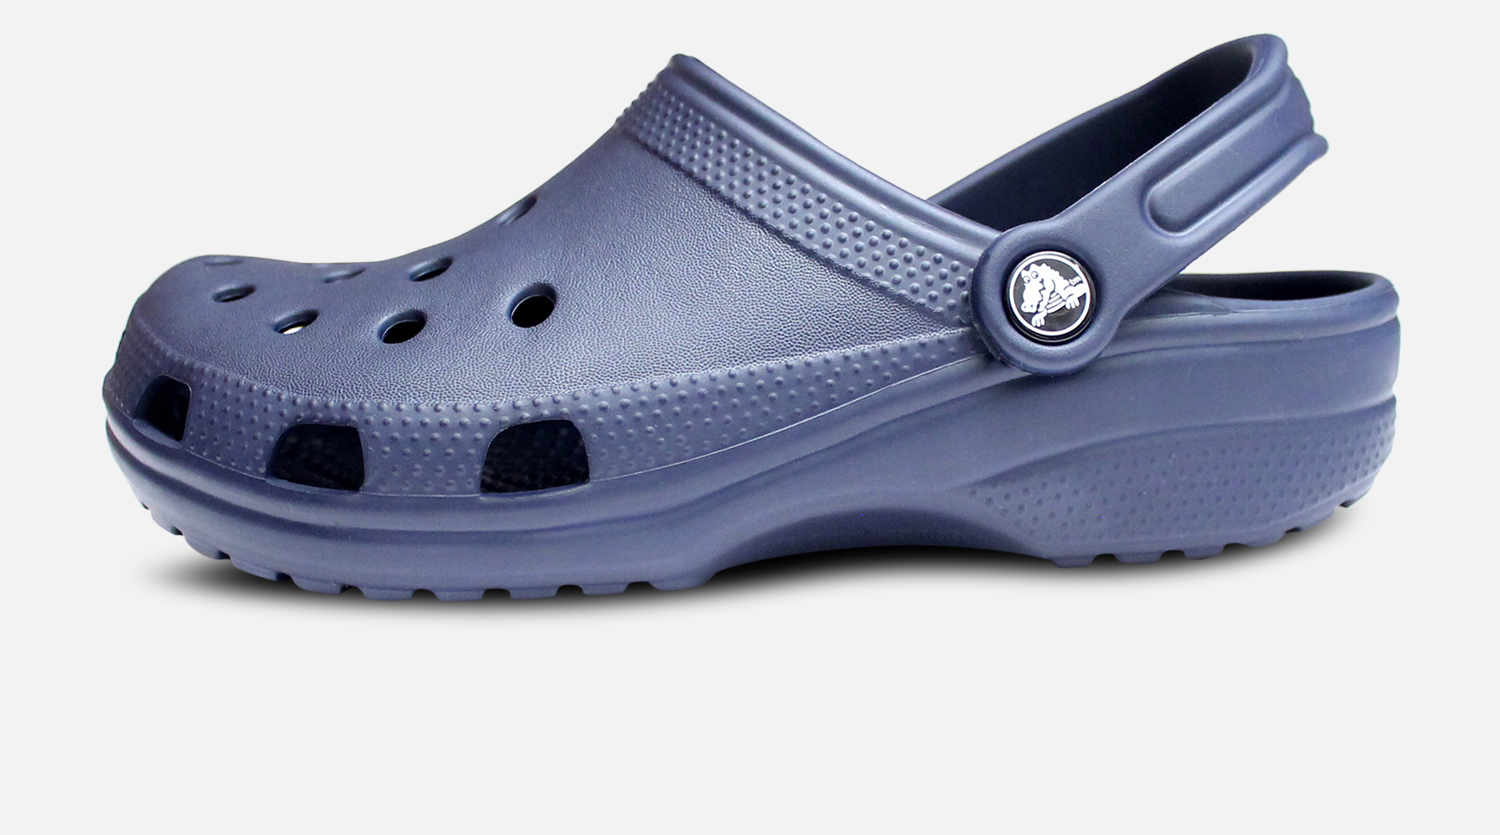 Crocs Classic Clog for Women in Navy Blue